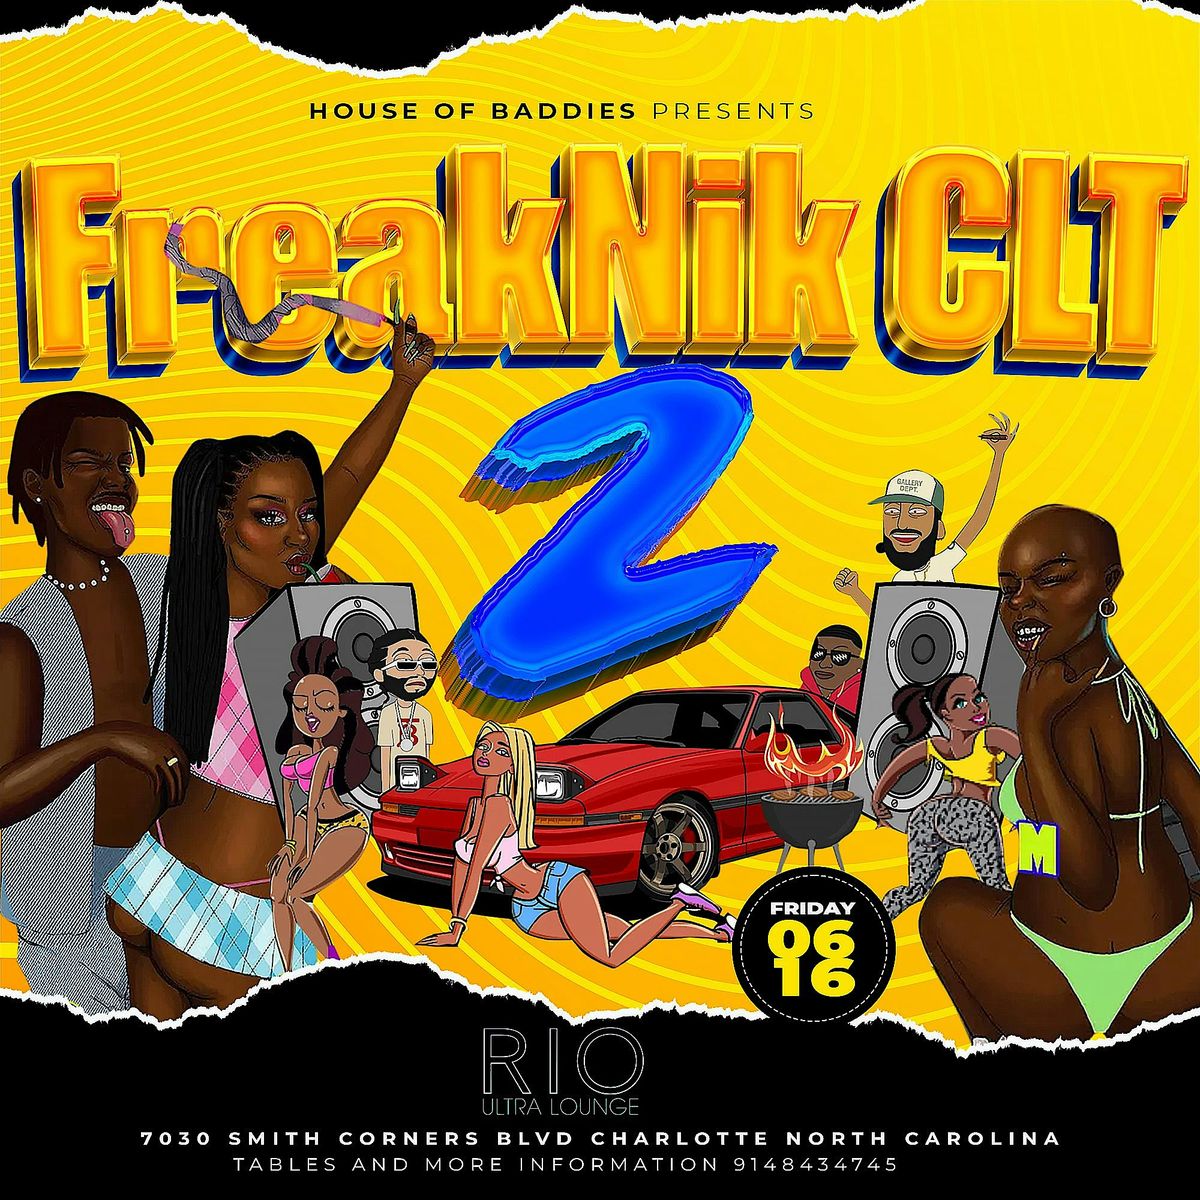 FreakNicClt 3! At rio ultra lounge!! $600 2 bottles! $250  specials also